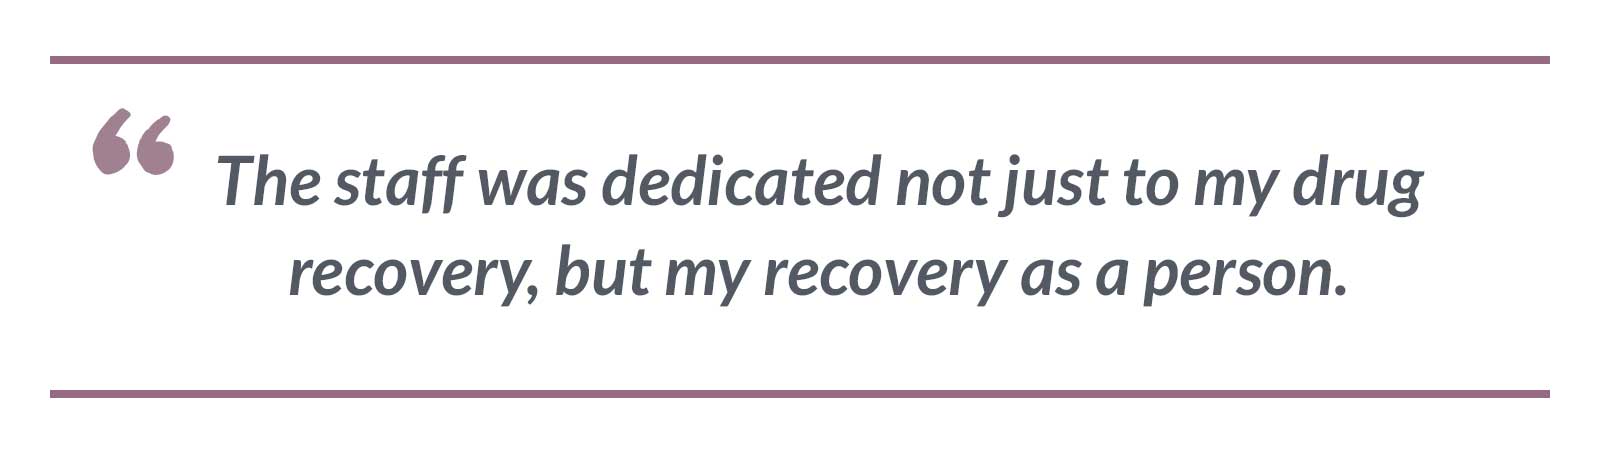 The staff was dedicated not just to my drug recovery, but my recovery as a person.-Brandi